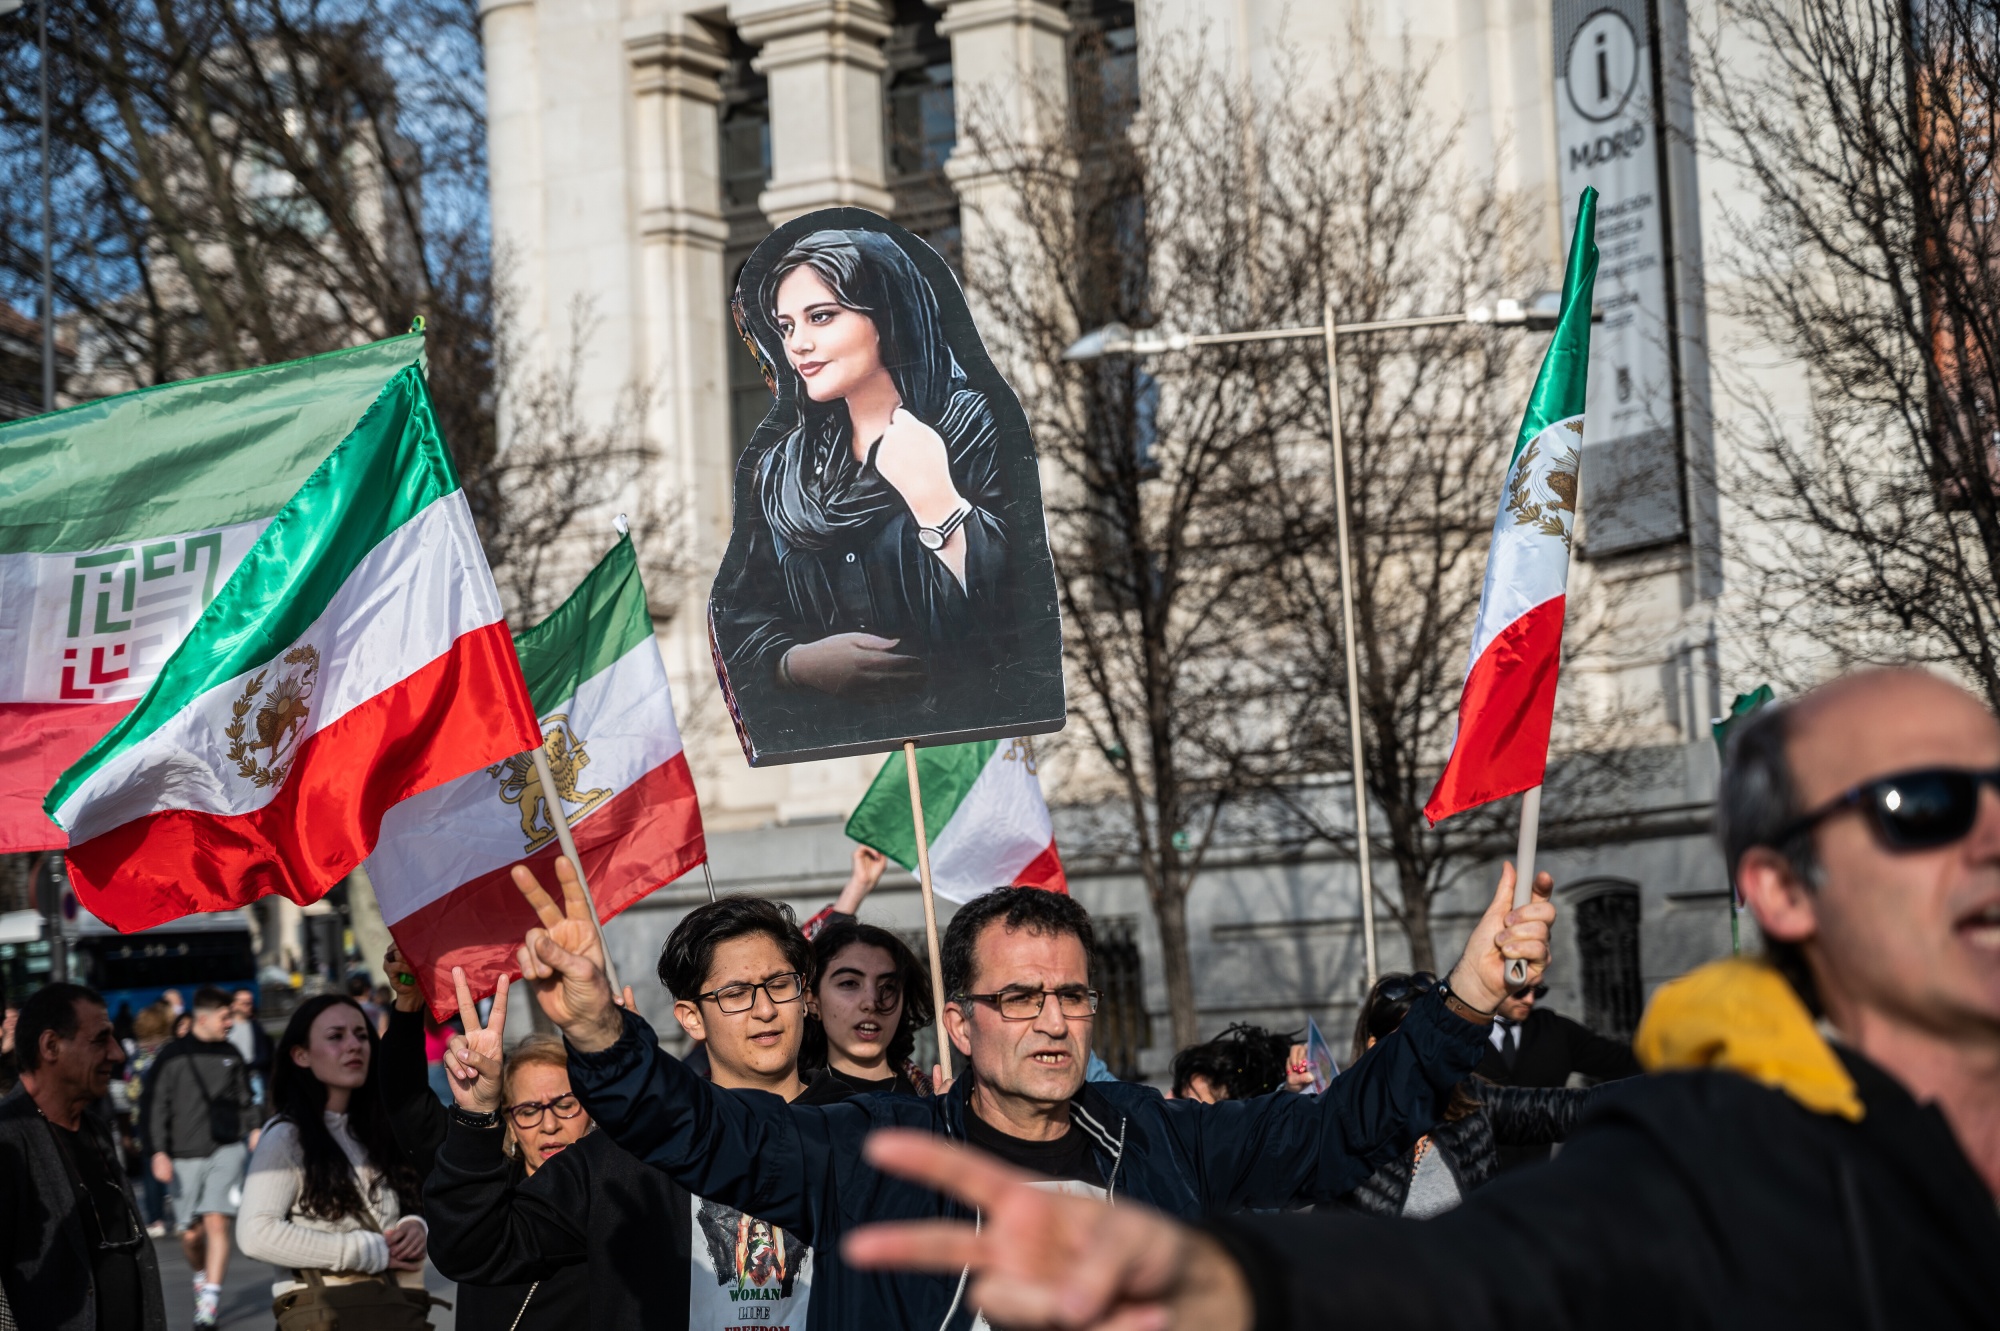 Protesters carry a picture of Masha Amini during a demonstration in Madrid this March, one of many around the world following her death in Iran last year.&nbsp;